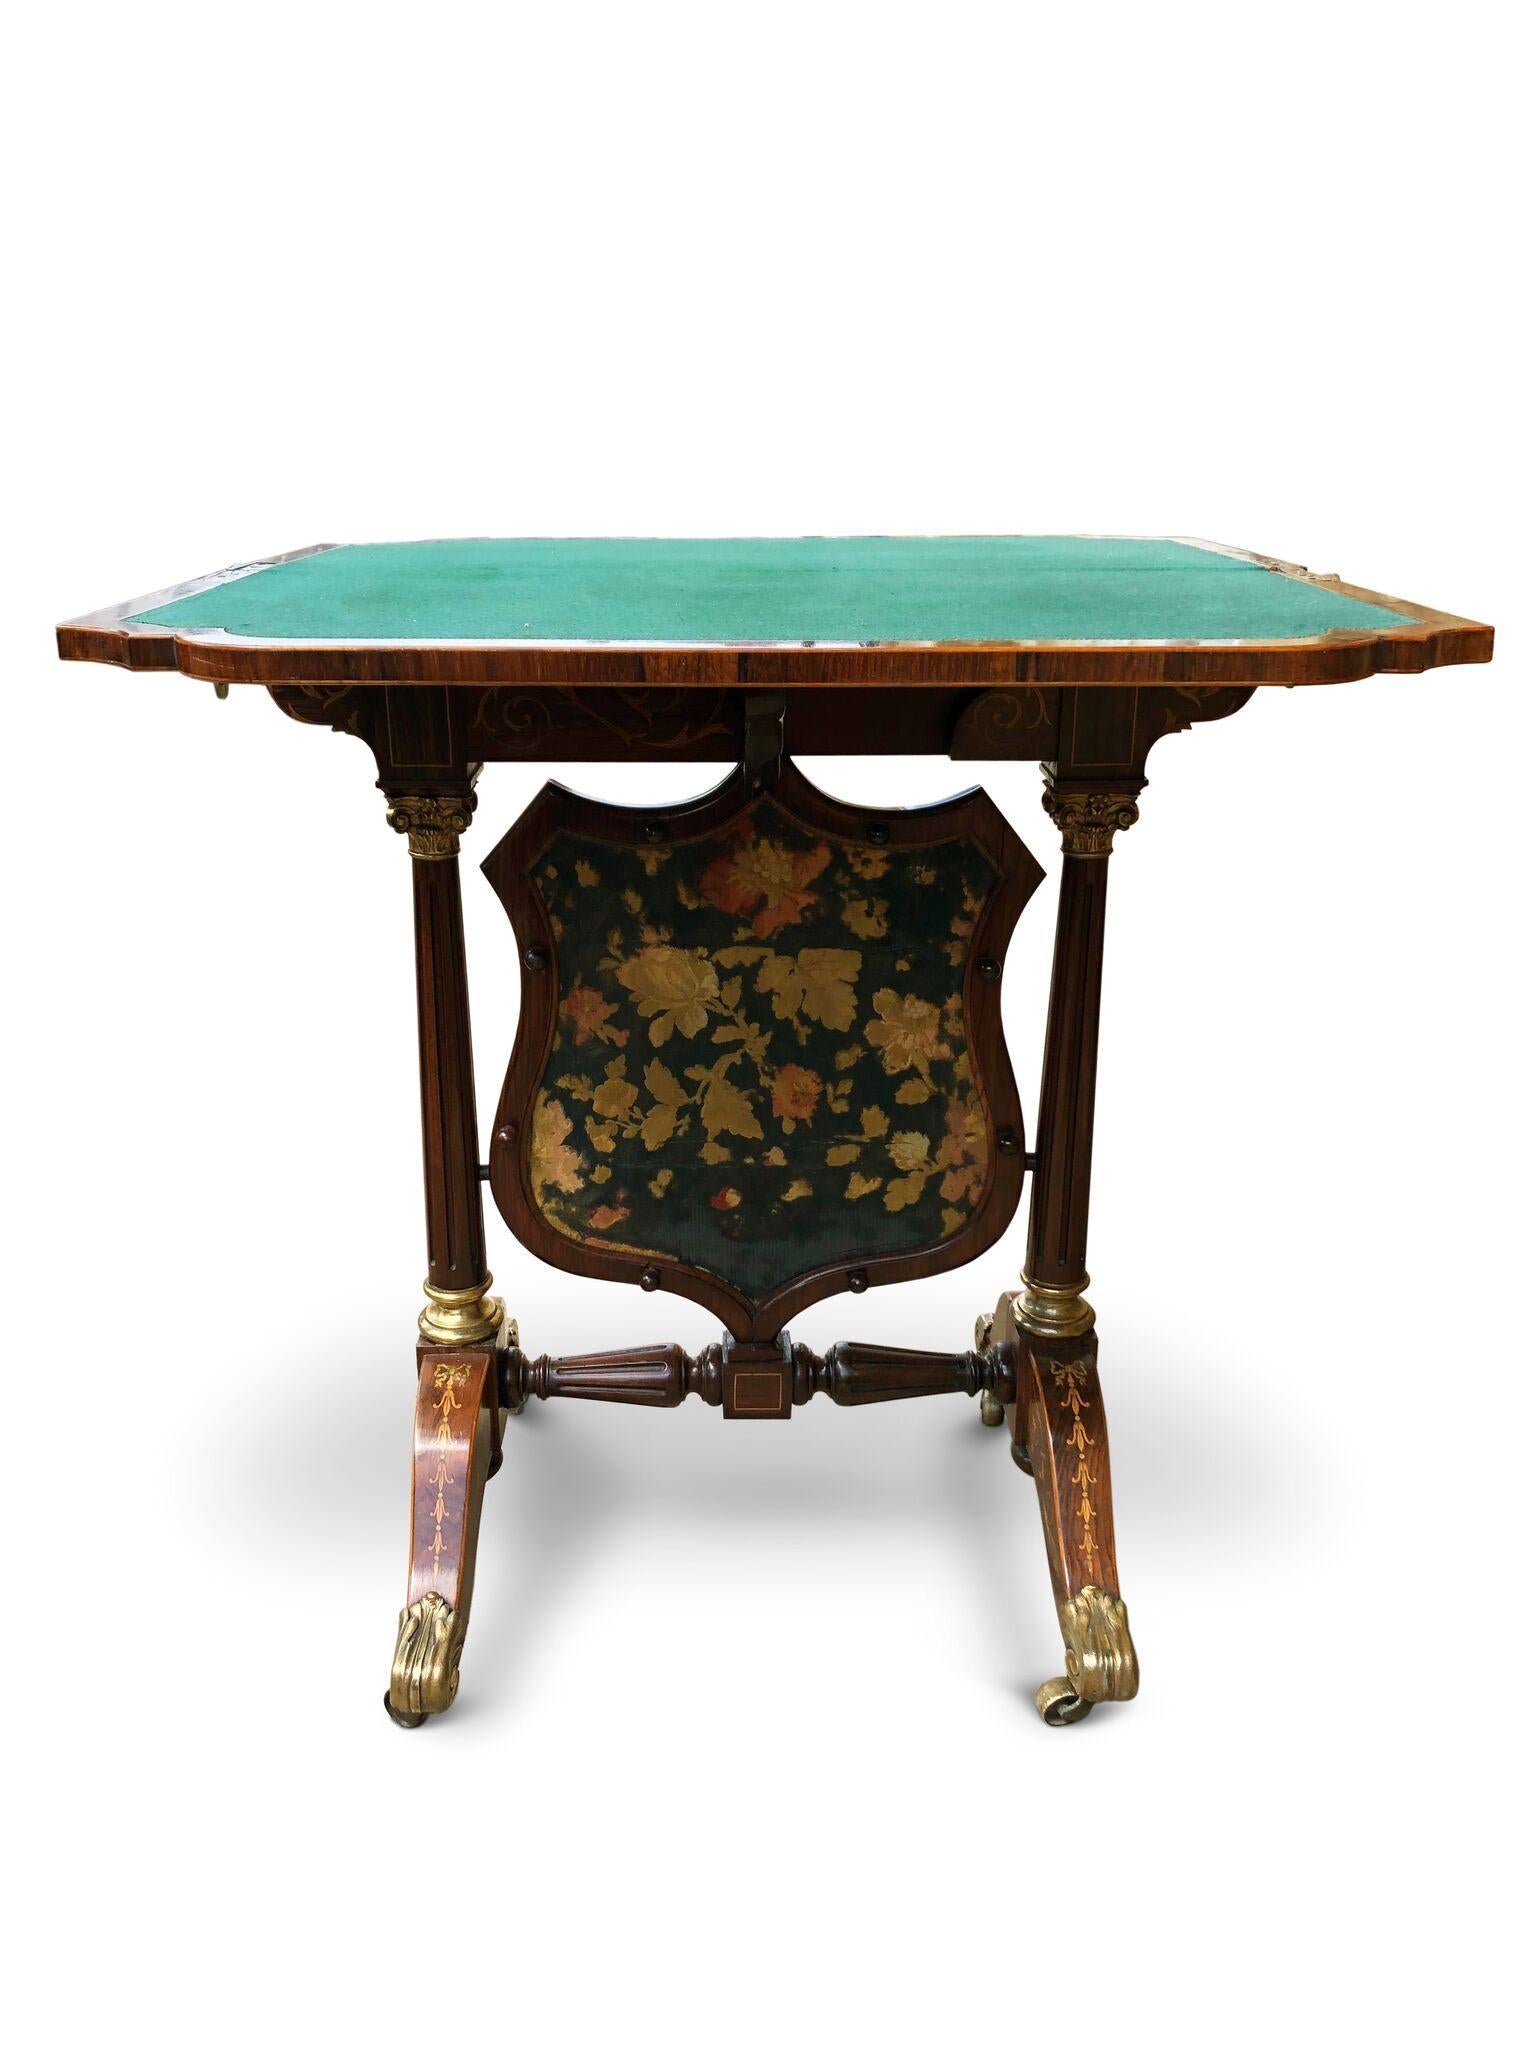 A very rare superb folding card table with fire screen.
Rosewood with Floral inlay throughout. The table folding upright when closed with brass turned stopping mechanism holding it in place, to be used as fire screen with the panel below.
The